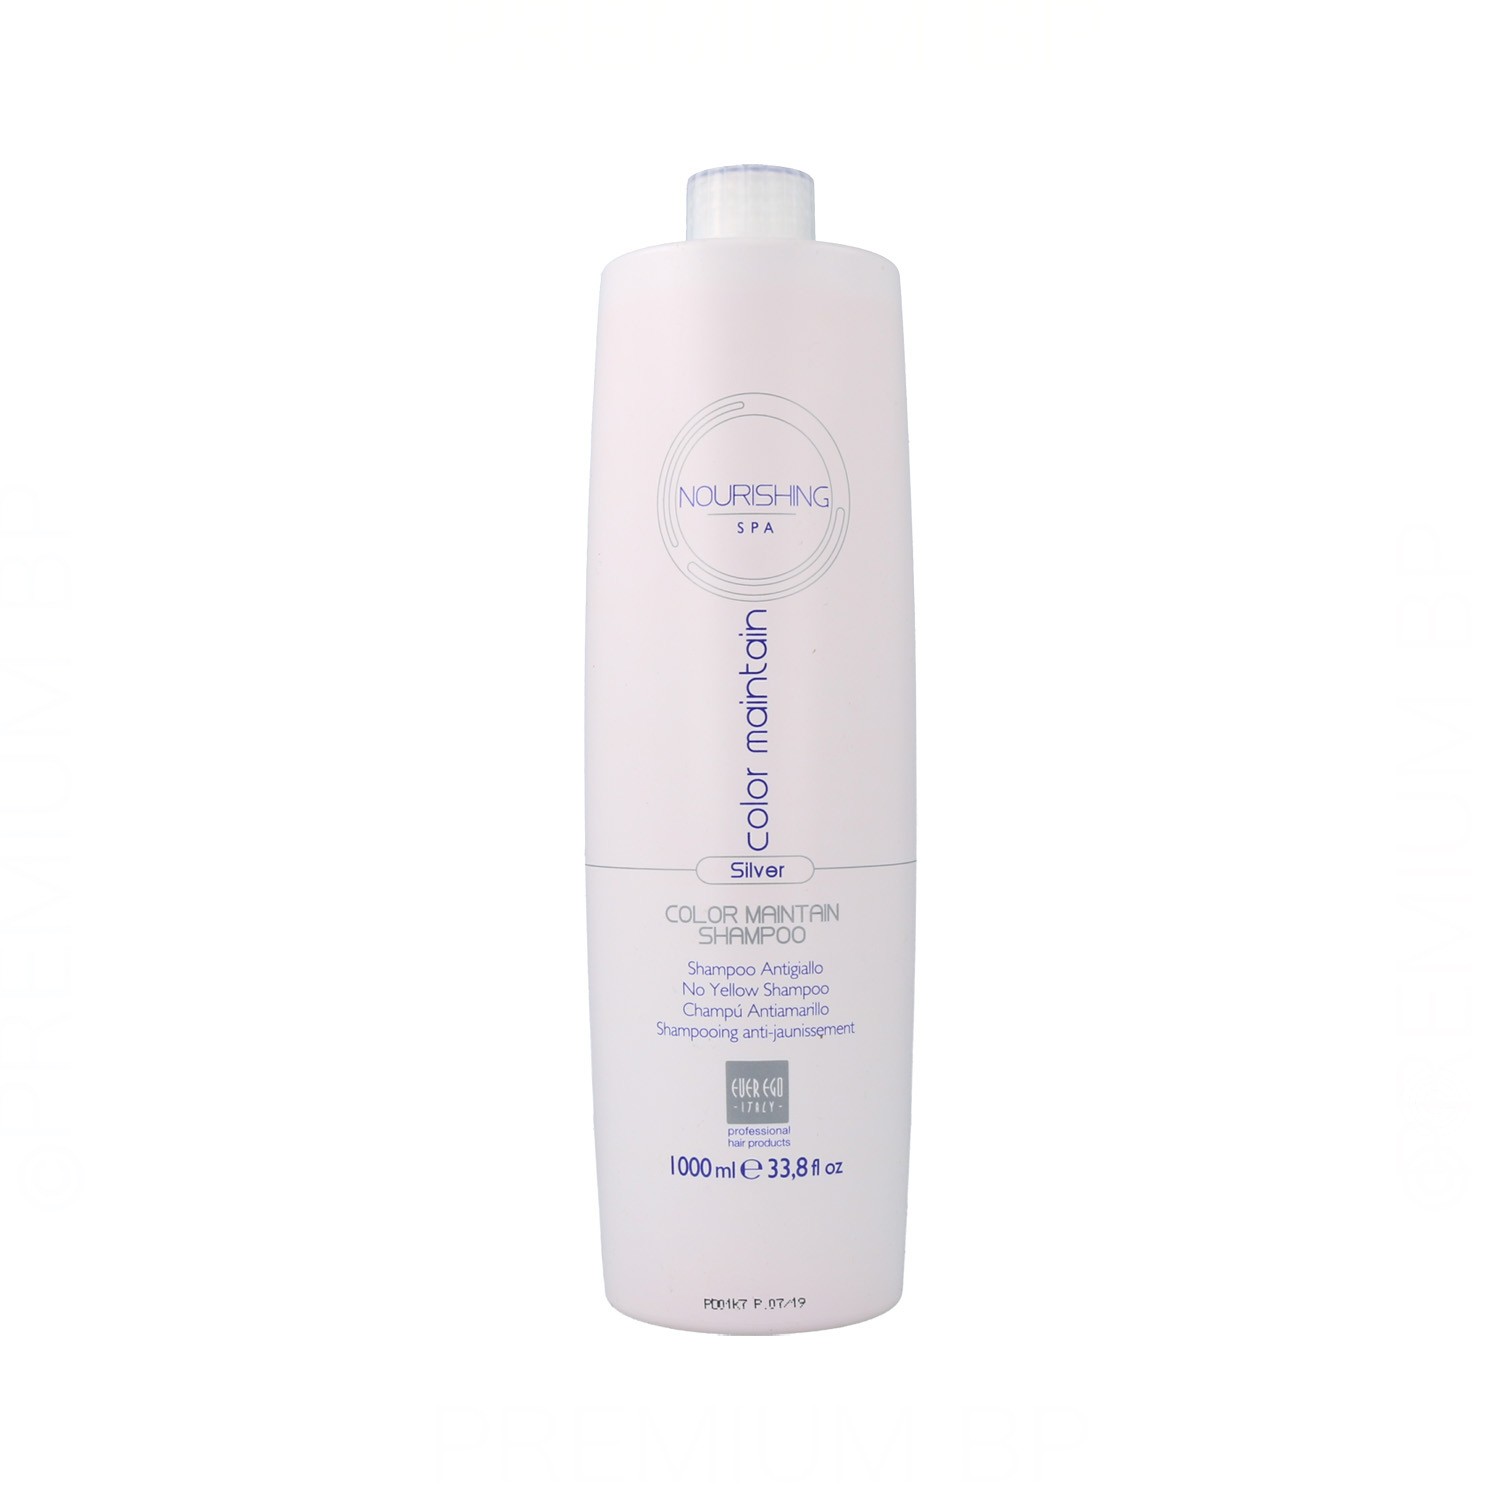 Everego Nourishing Spa Couleur Silver Mantain Shampooing 1000 ml